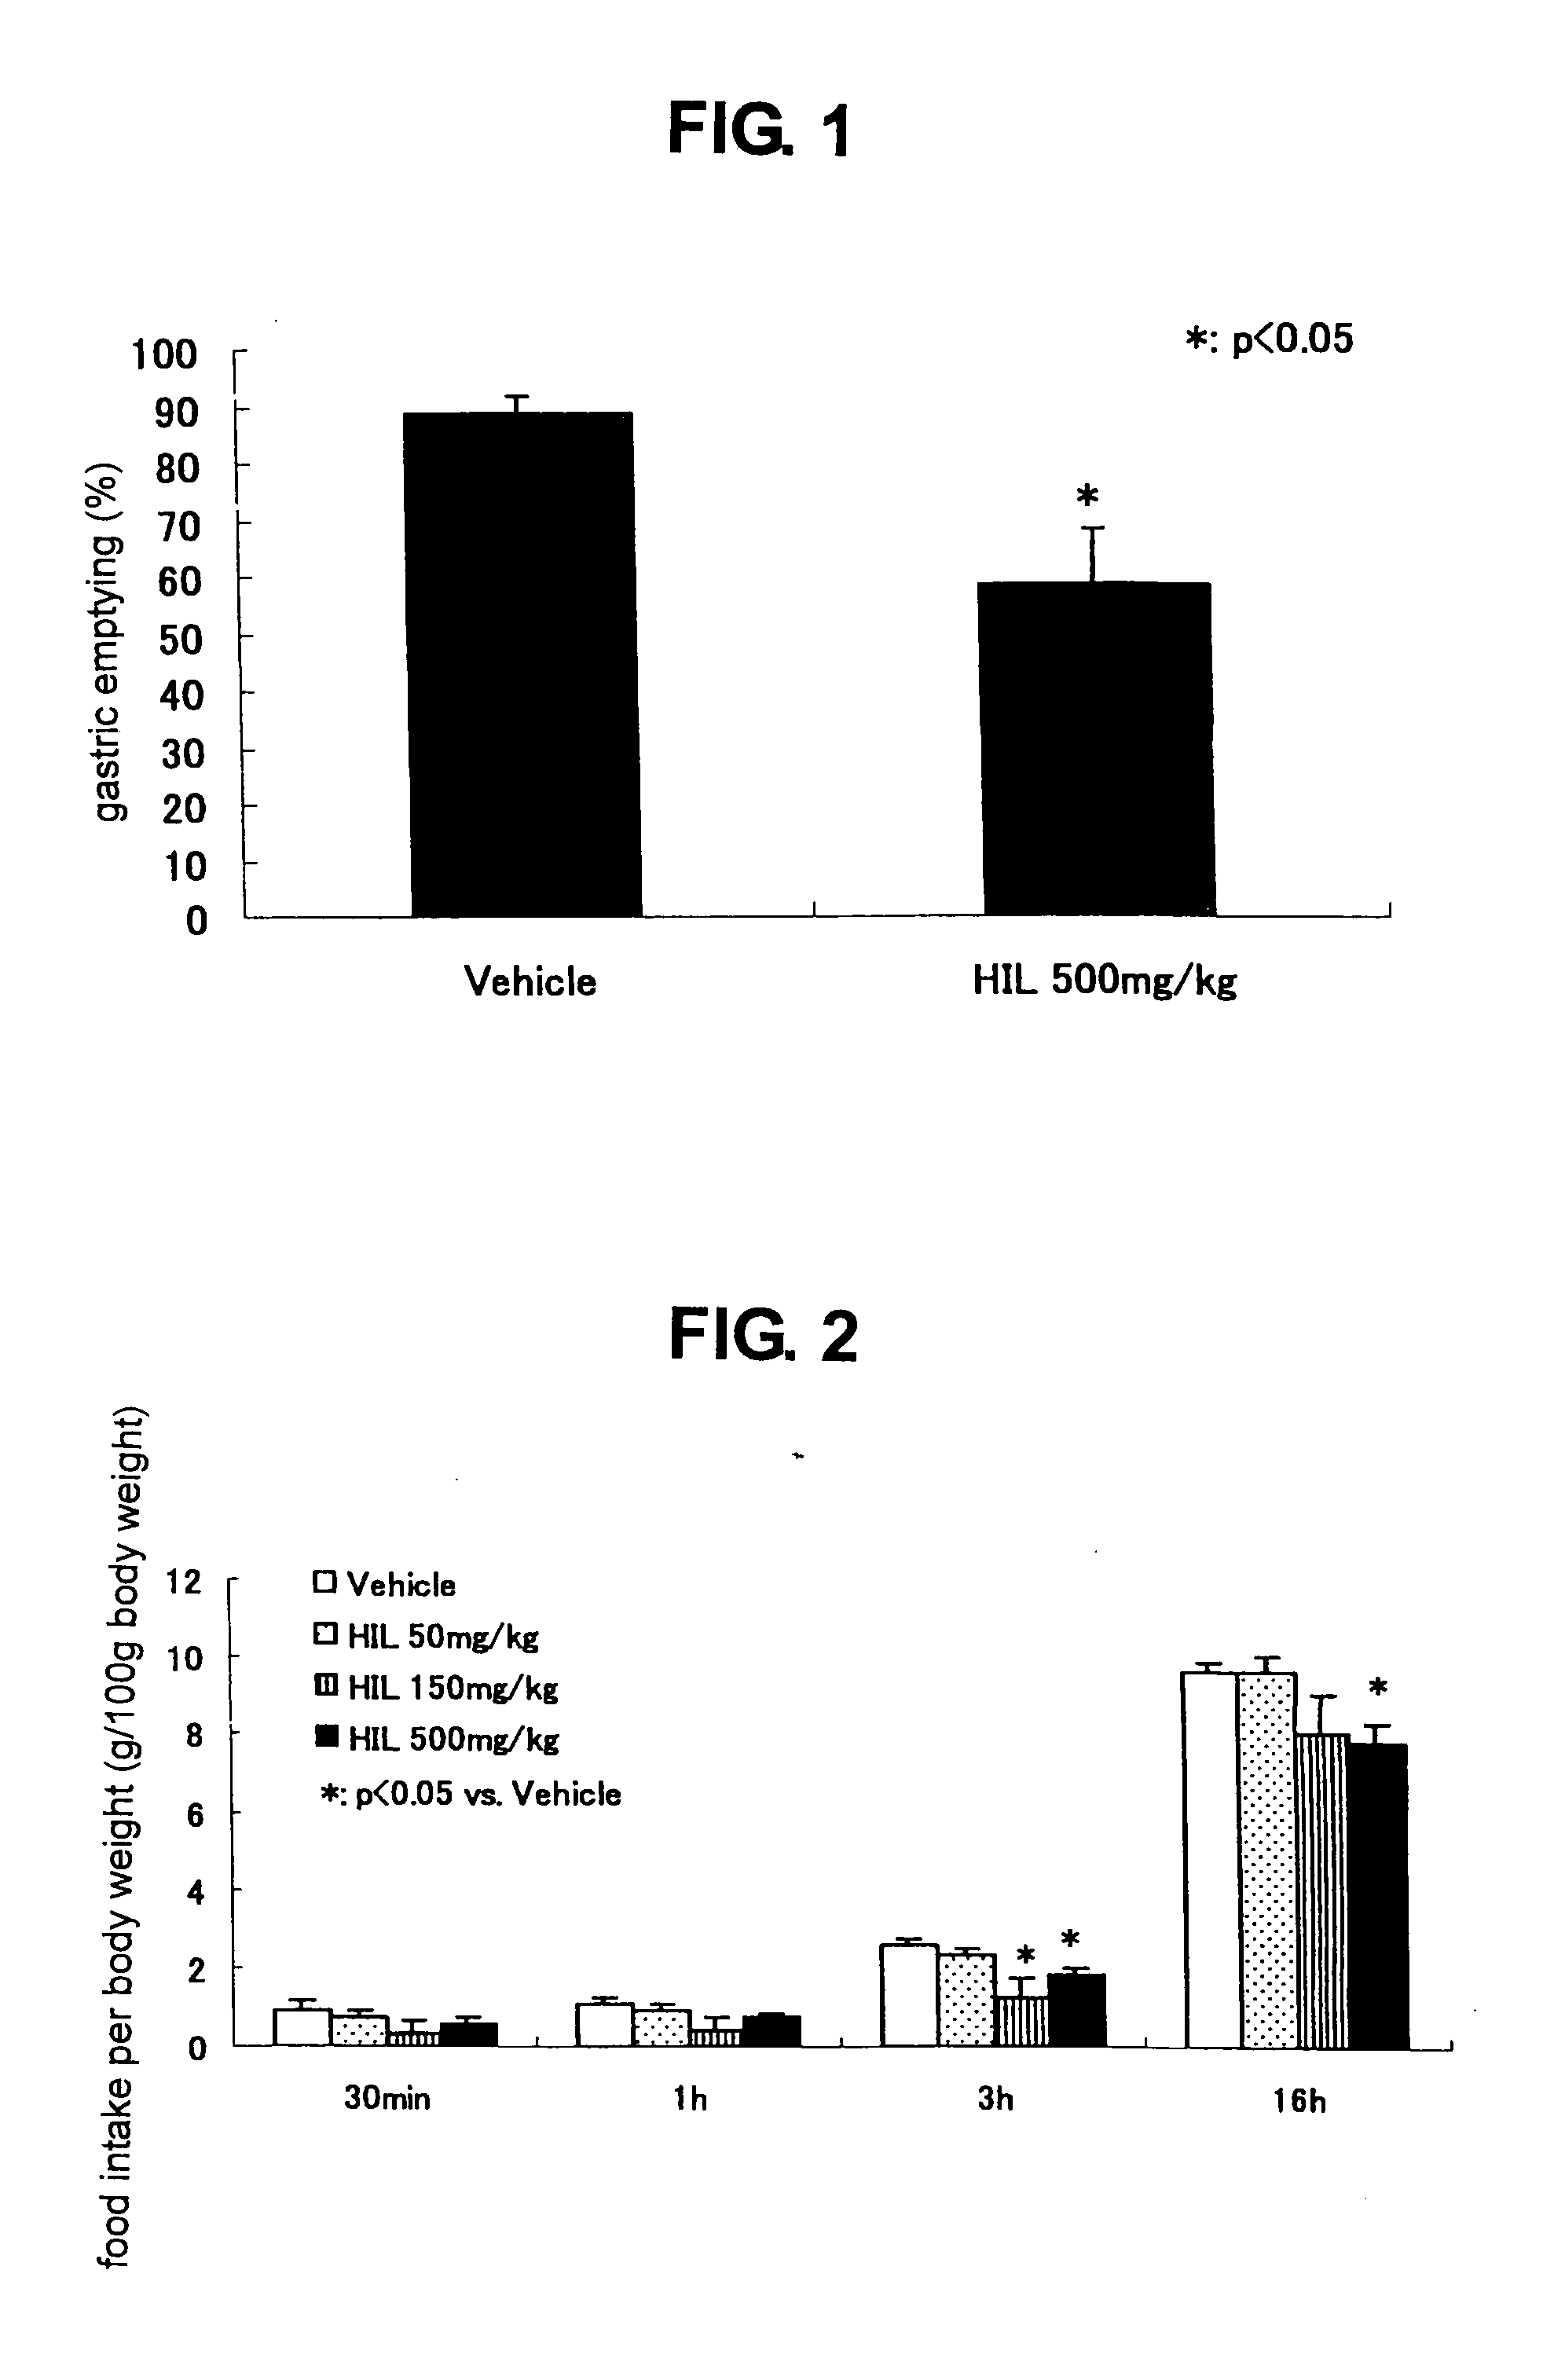 Agent for suppression of gastric emptying comprising 4-hydroxyisoleucine